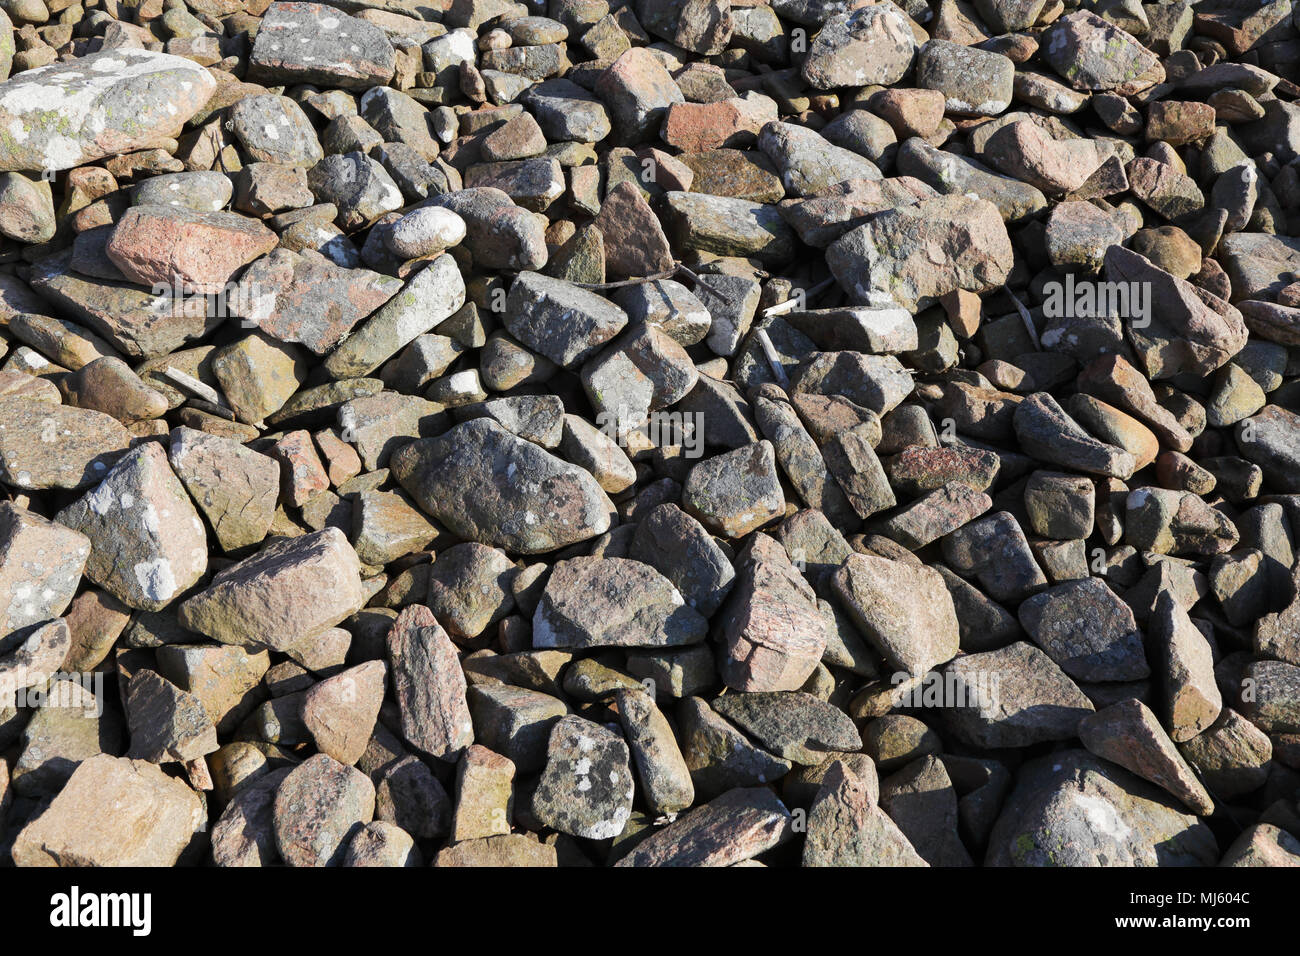 A field of rubble at Hovs hallar, Sweden. Stock Photo